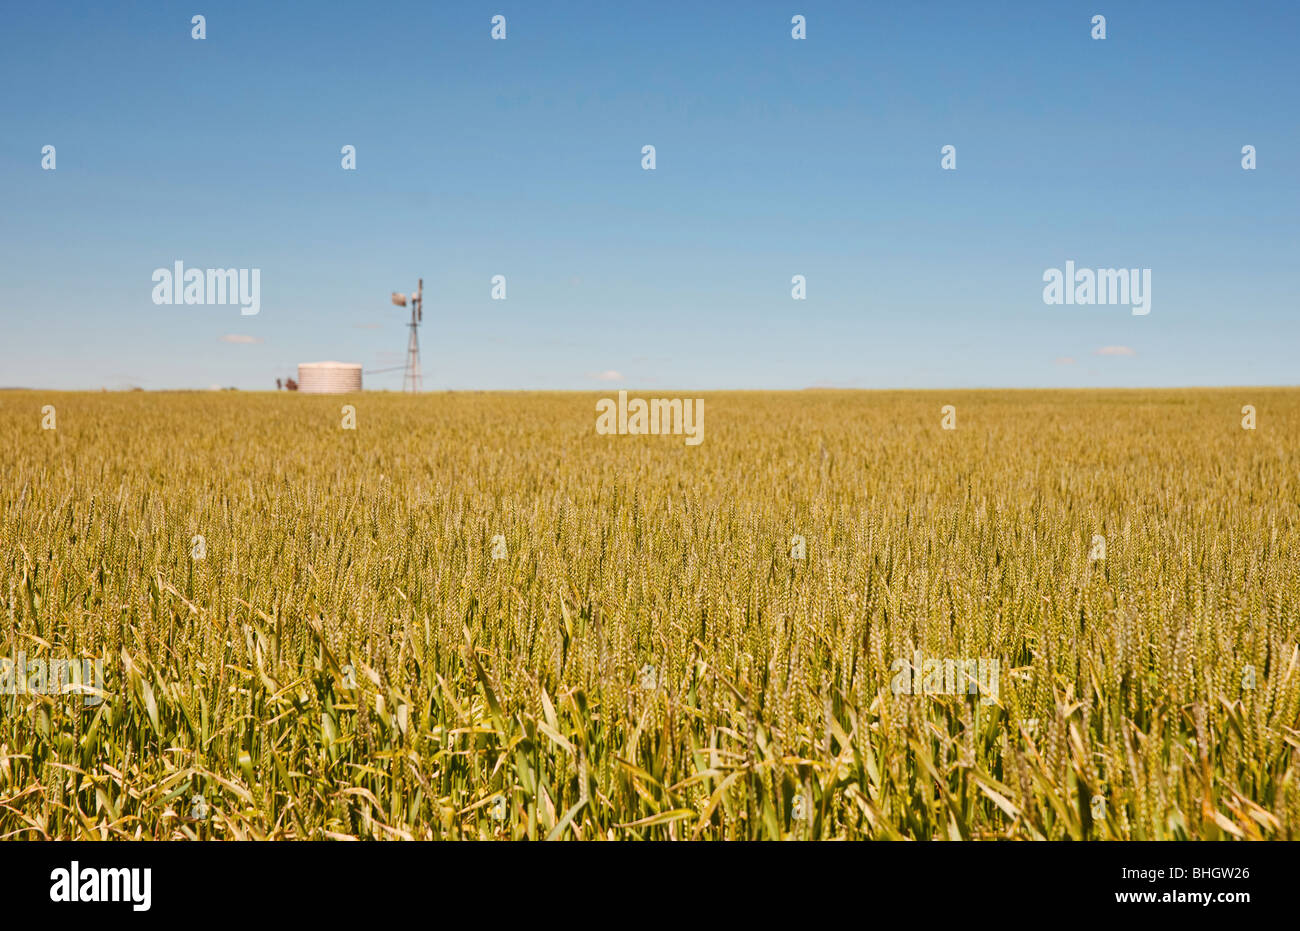 windmill in fields of wheat in the countryside at burra south australia Stock Photo